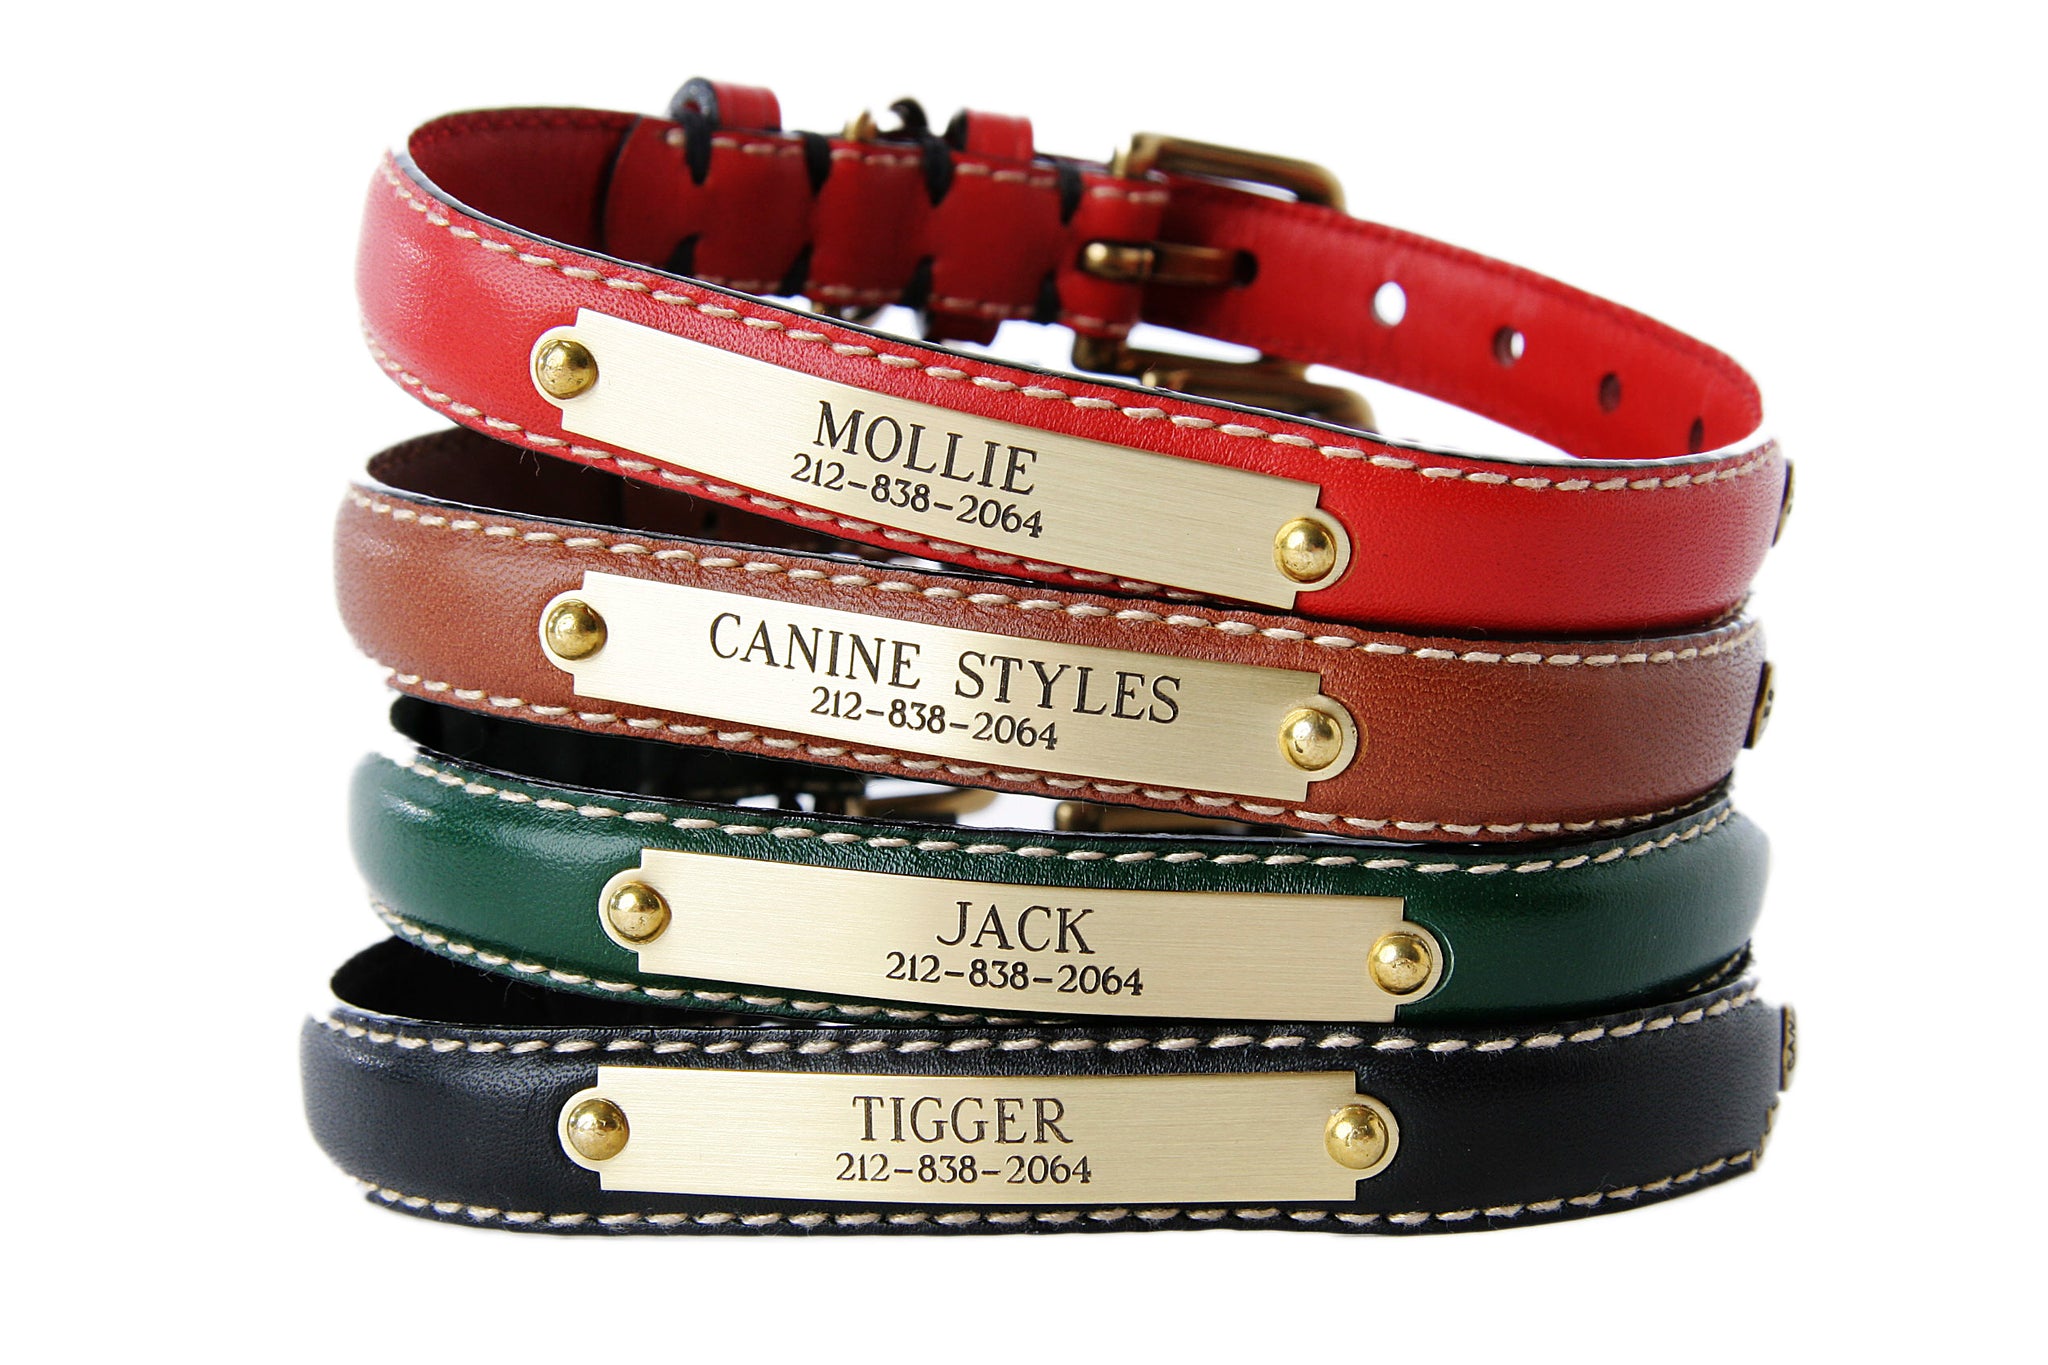 Personalized Dog Collar Brown, Brown Leather Dog Collar